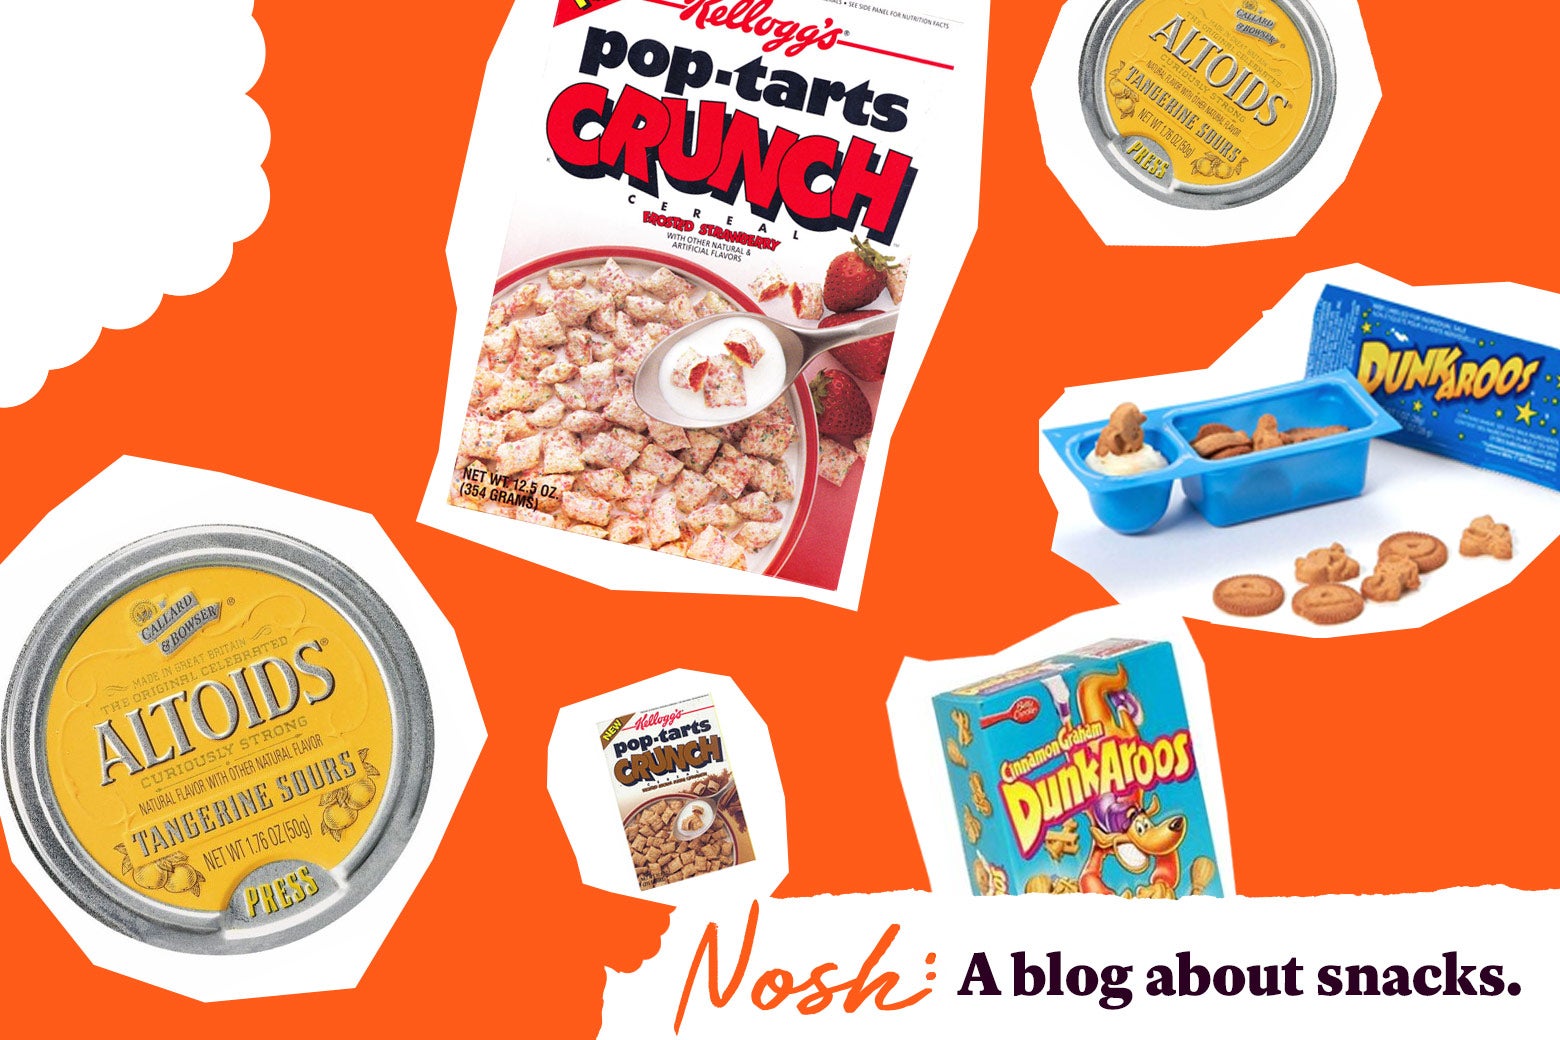 Pop-Tarts Crunch, Altoids Tangerine Sours, and Dunk-a-Roos.